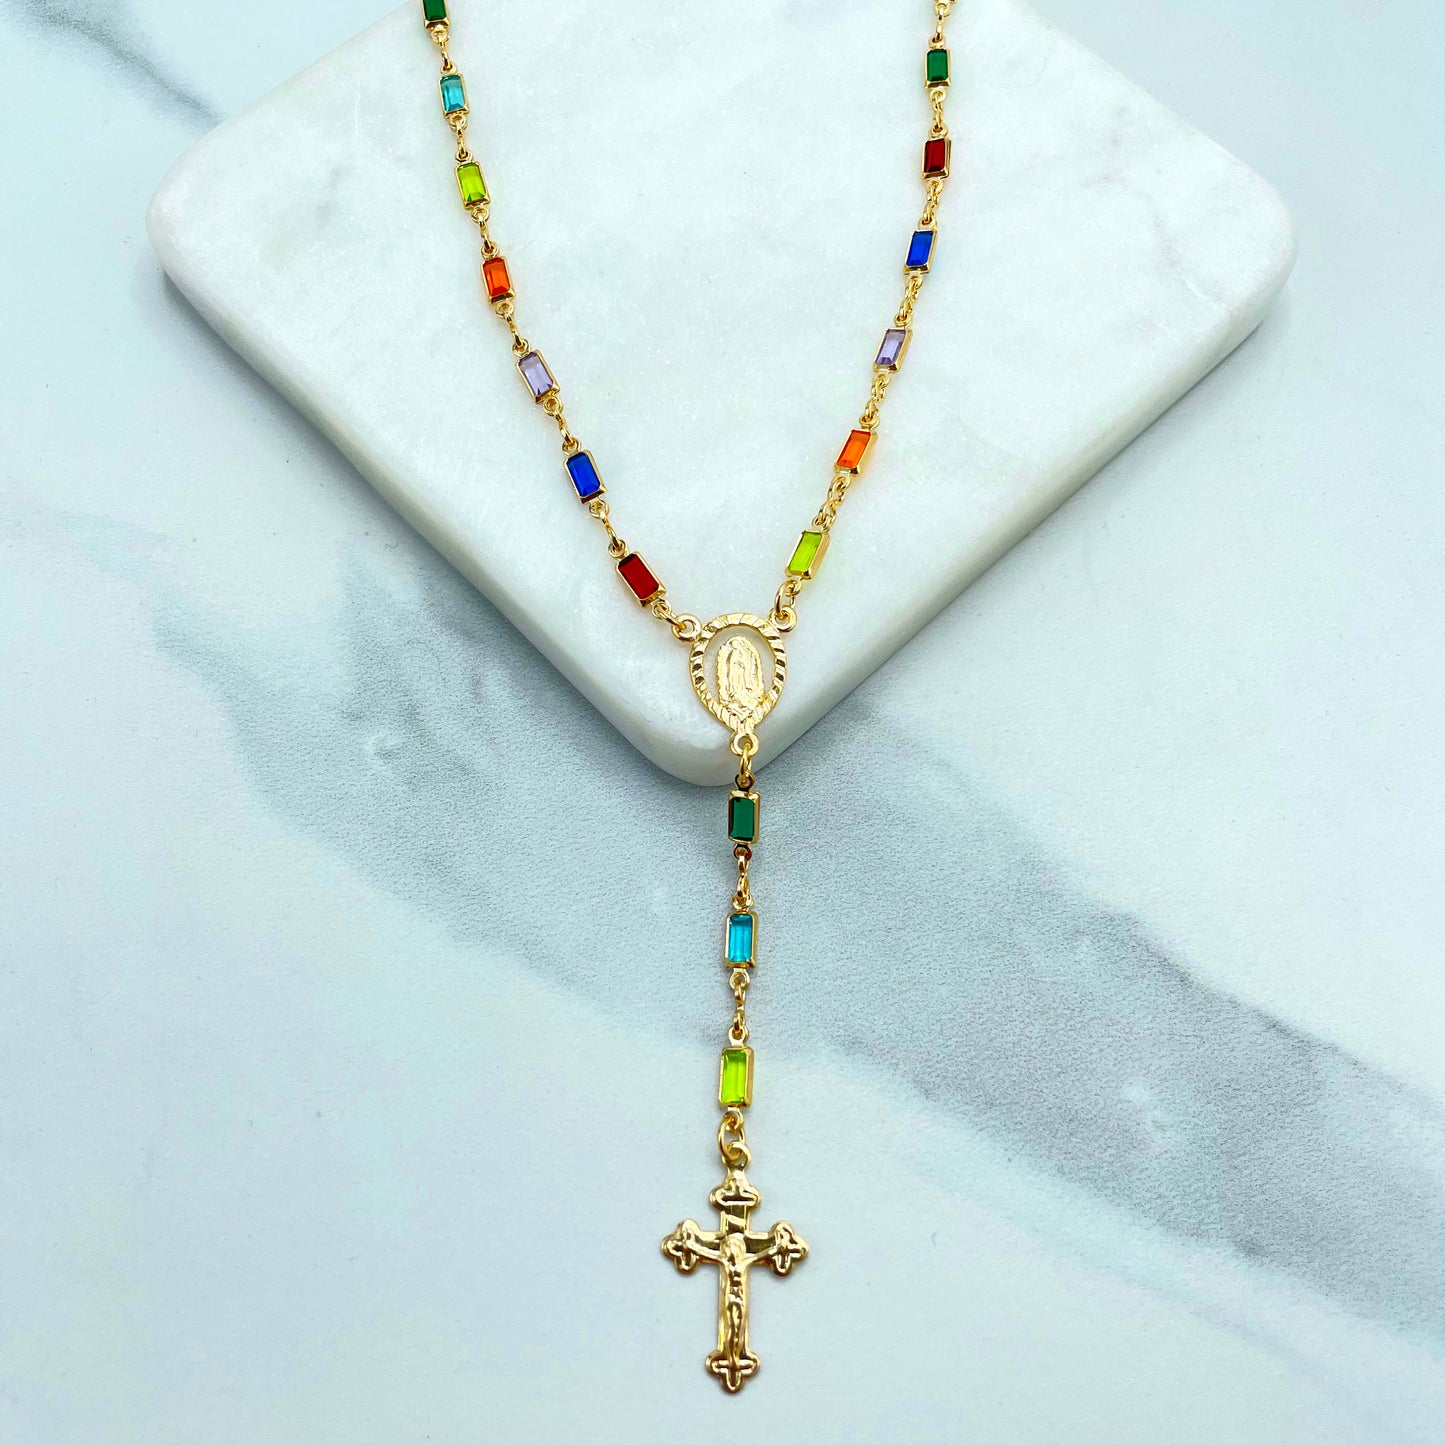 18k Gold Filled Virgen De Guadalupe, Our Lady of Guadalupe, Colorful Fashion Rosary or Rosary Style Bracelet, Wholesale Jewelry Supplies